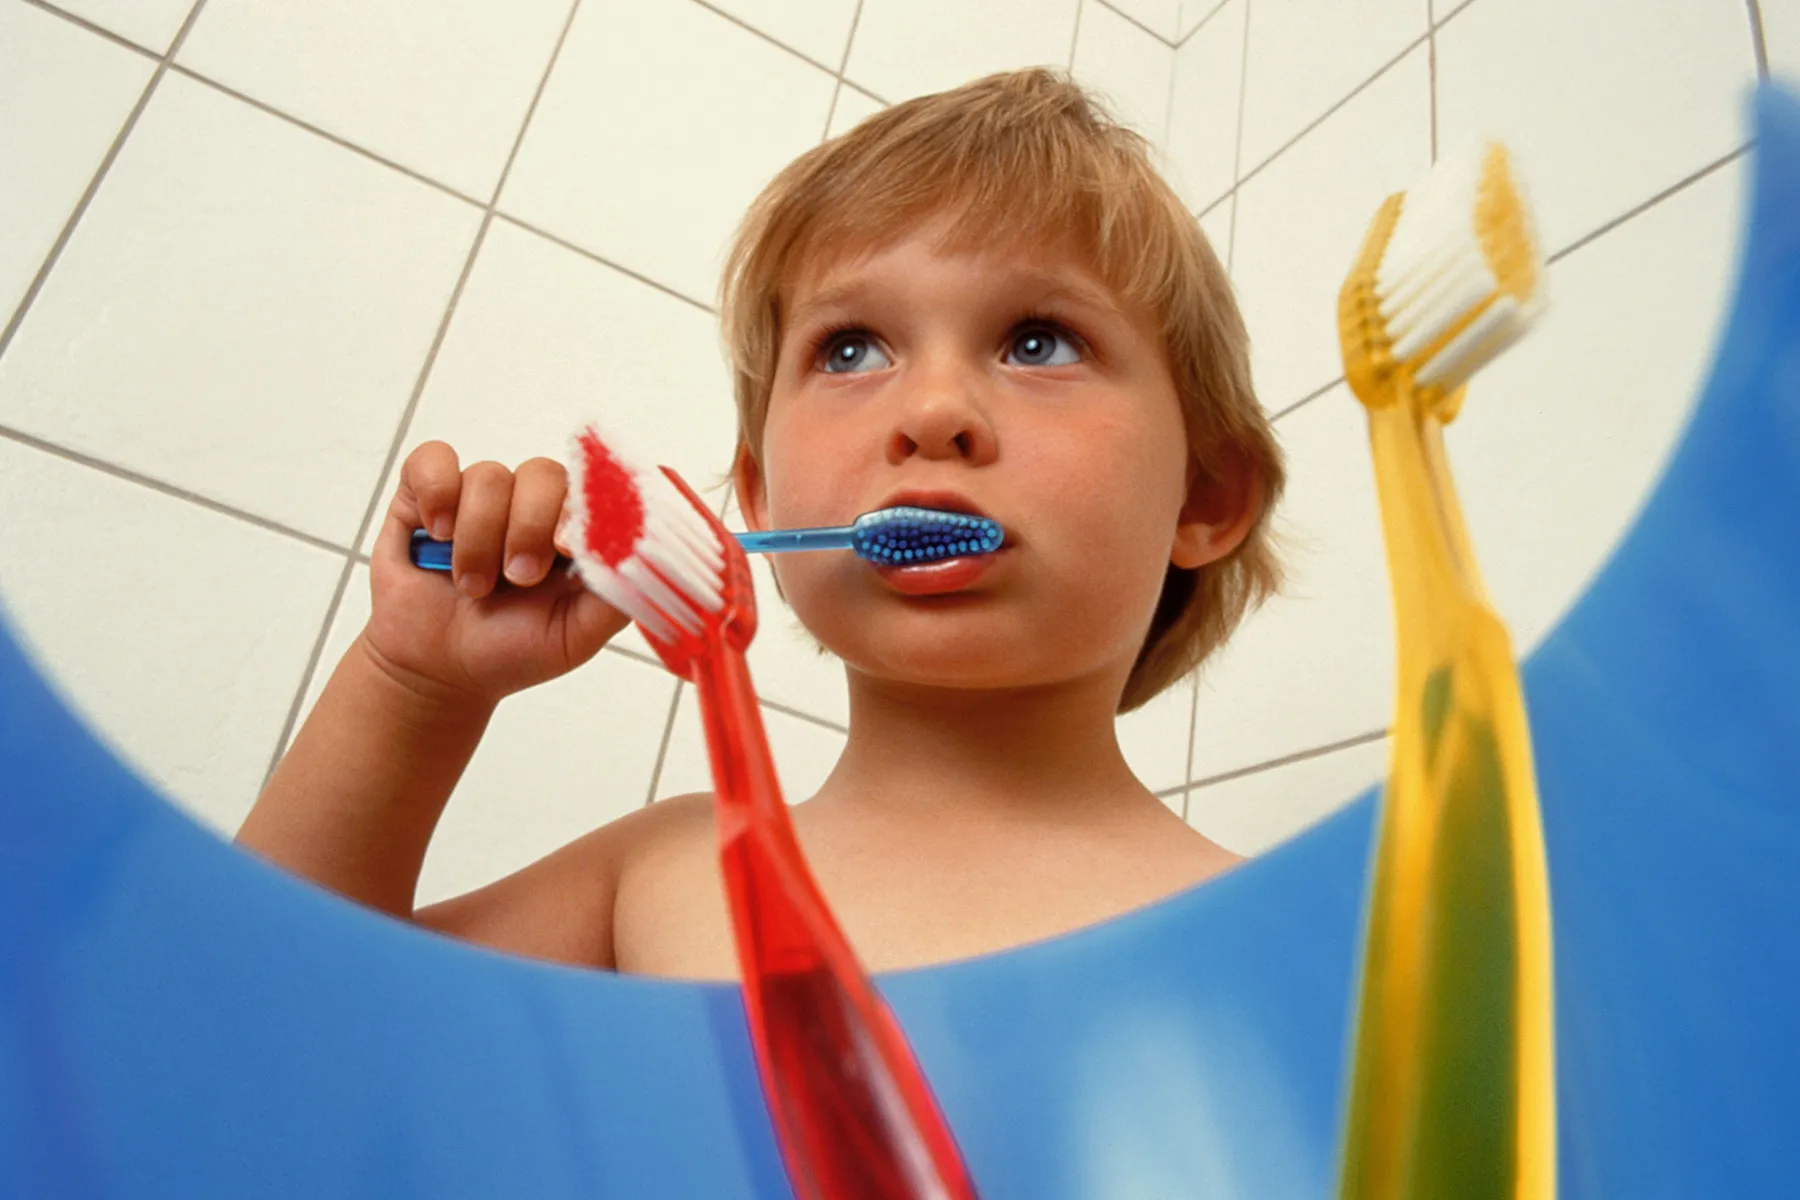 The 'Oreo Test' and Other Ways to Help Kids' Oral Health